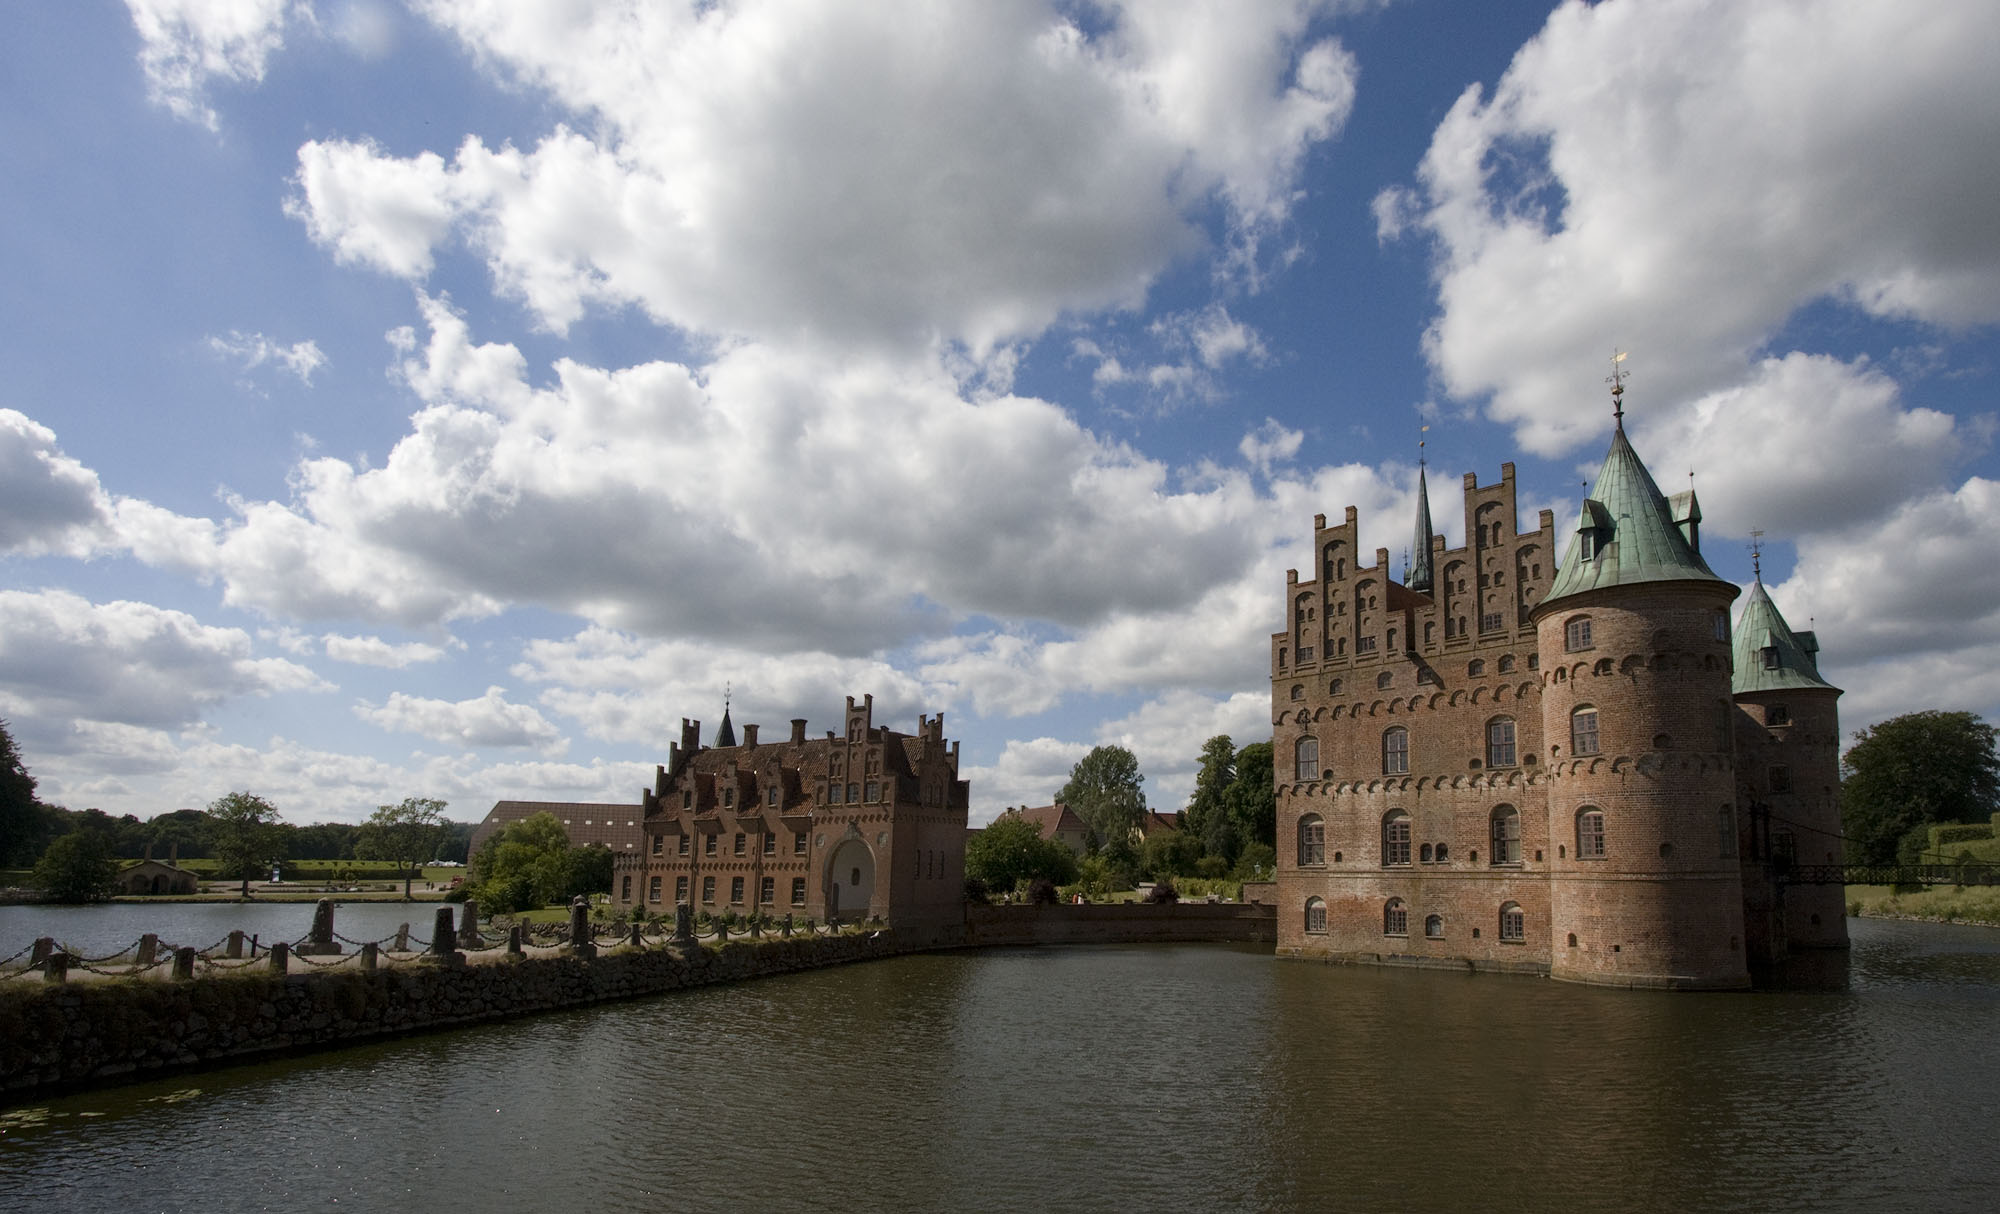 Amazing Egeskov Castle Pictures & Backgrounds